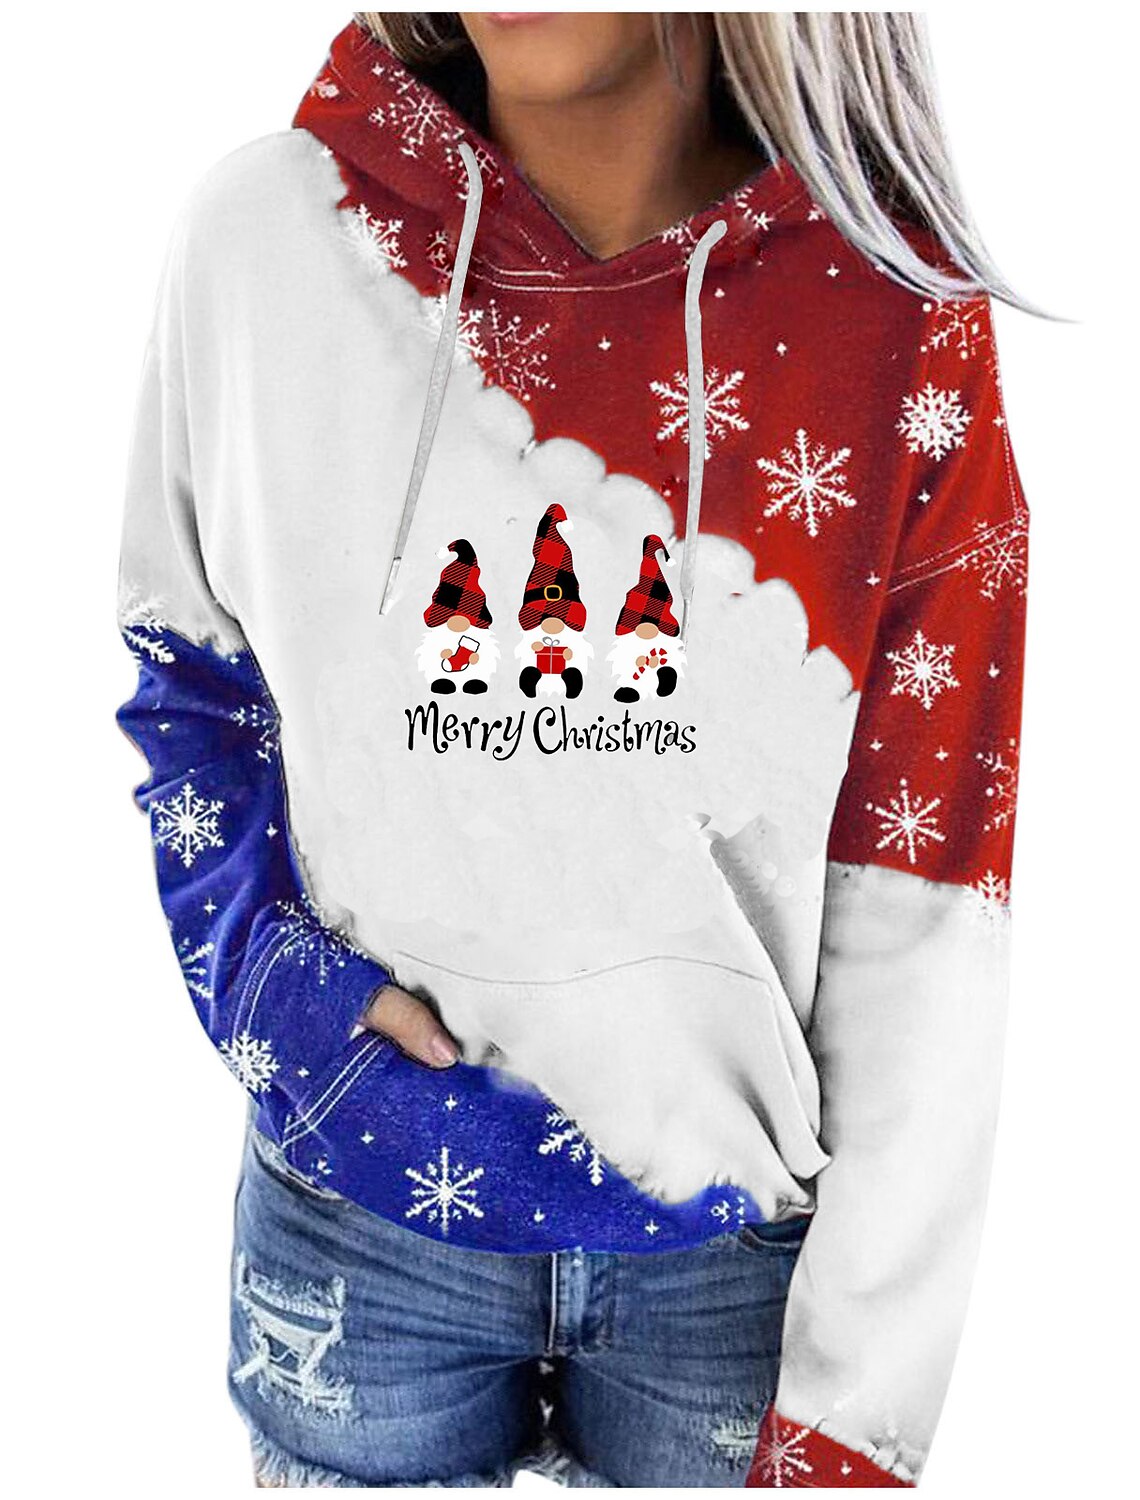 Merry Christmas Print Fall Clothes for Women,Snowflake Red Blue Patchwork Hoodies Tops Drawstring Vintage Sweatshirt 